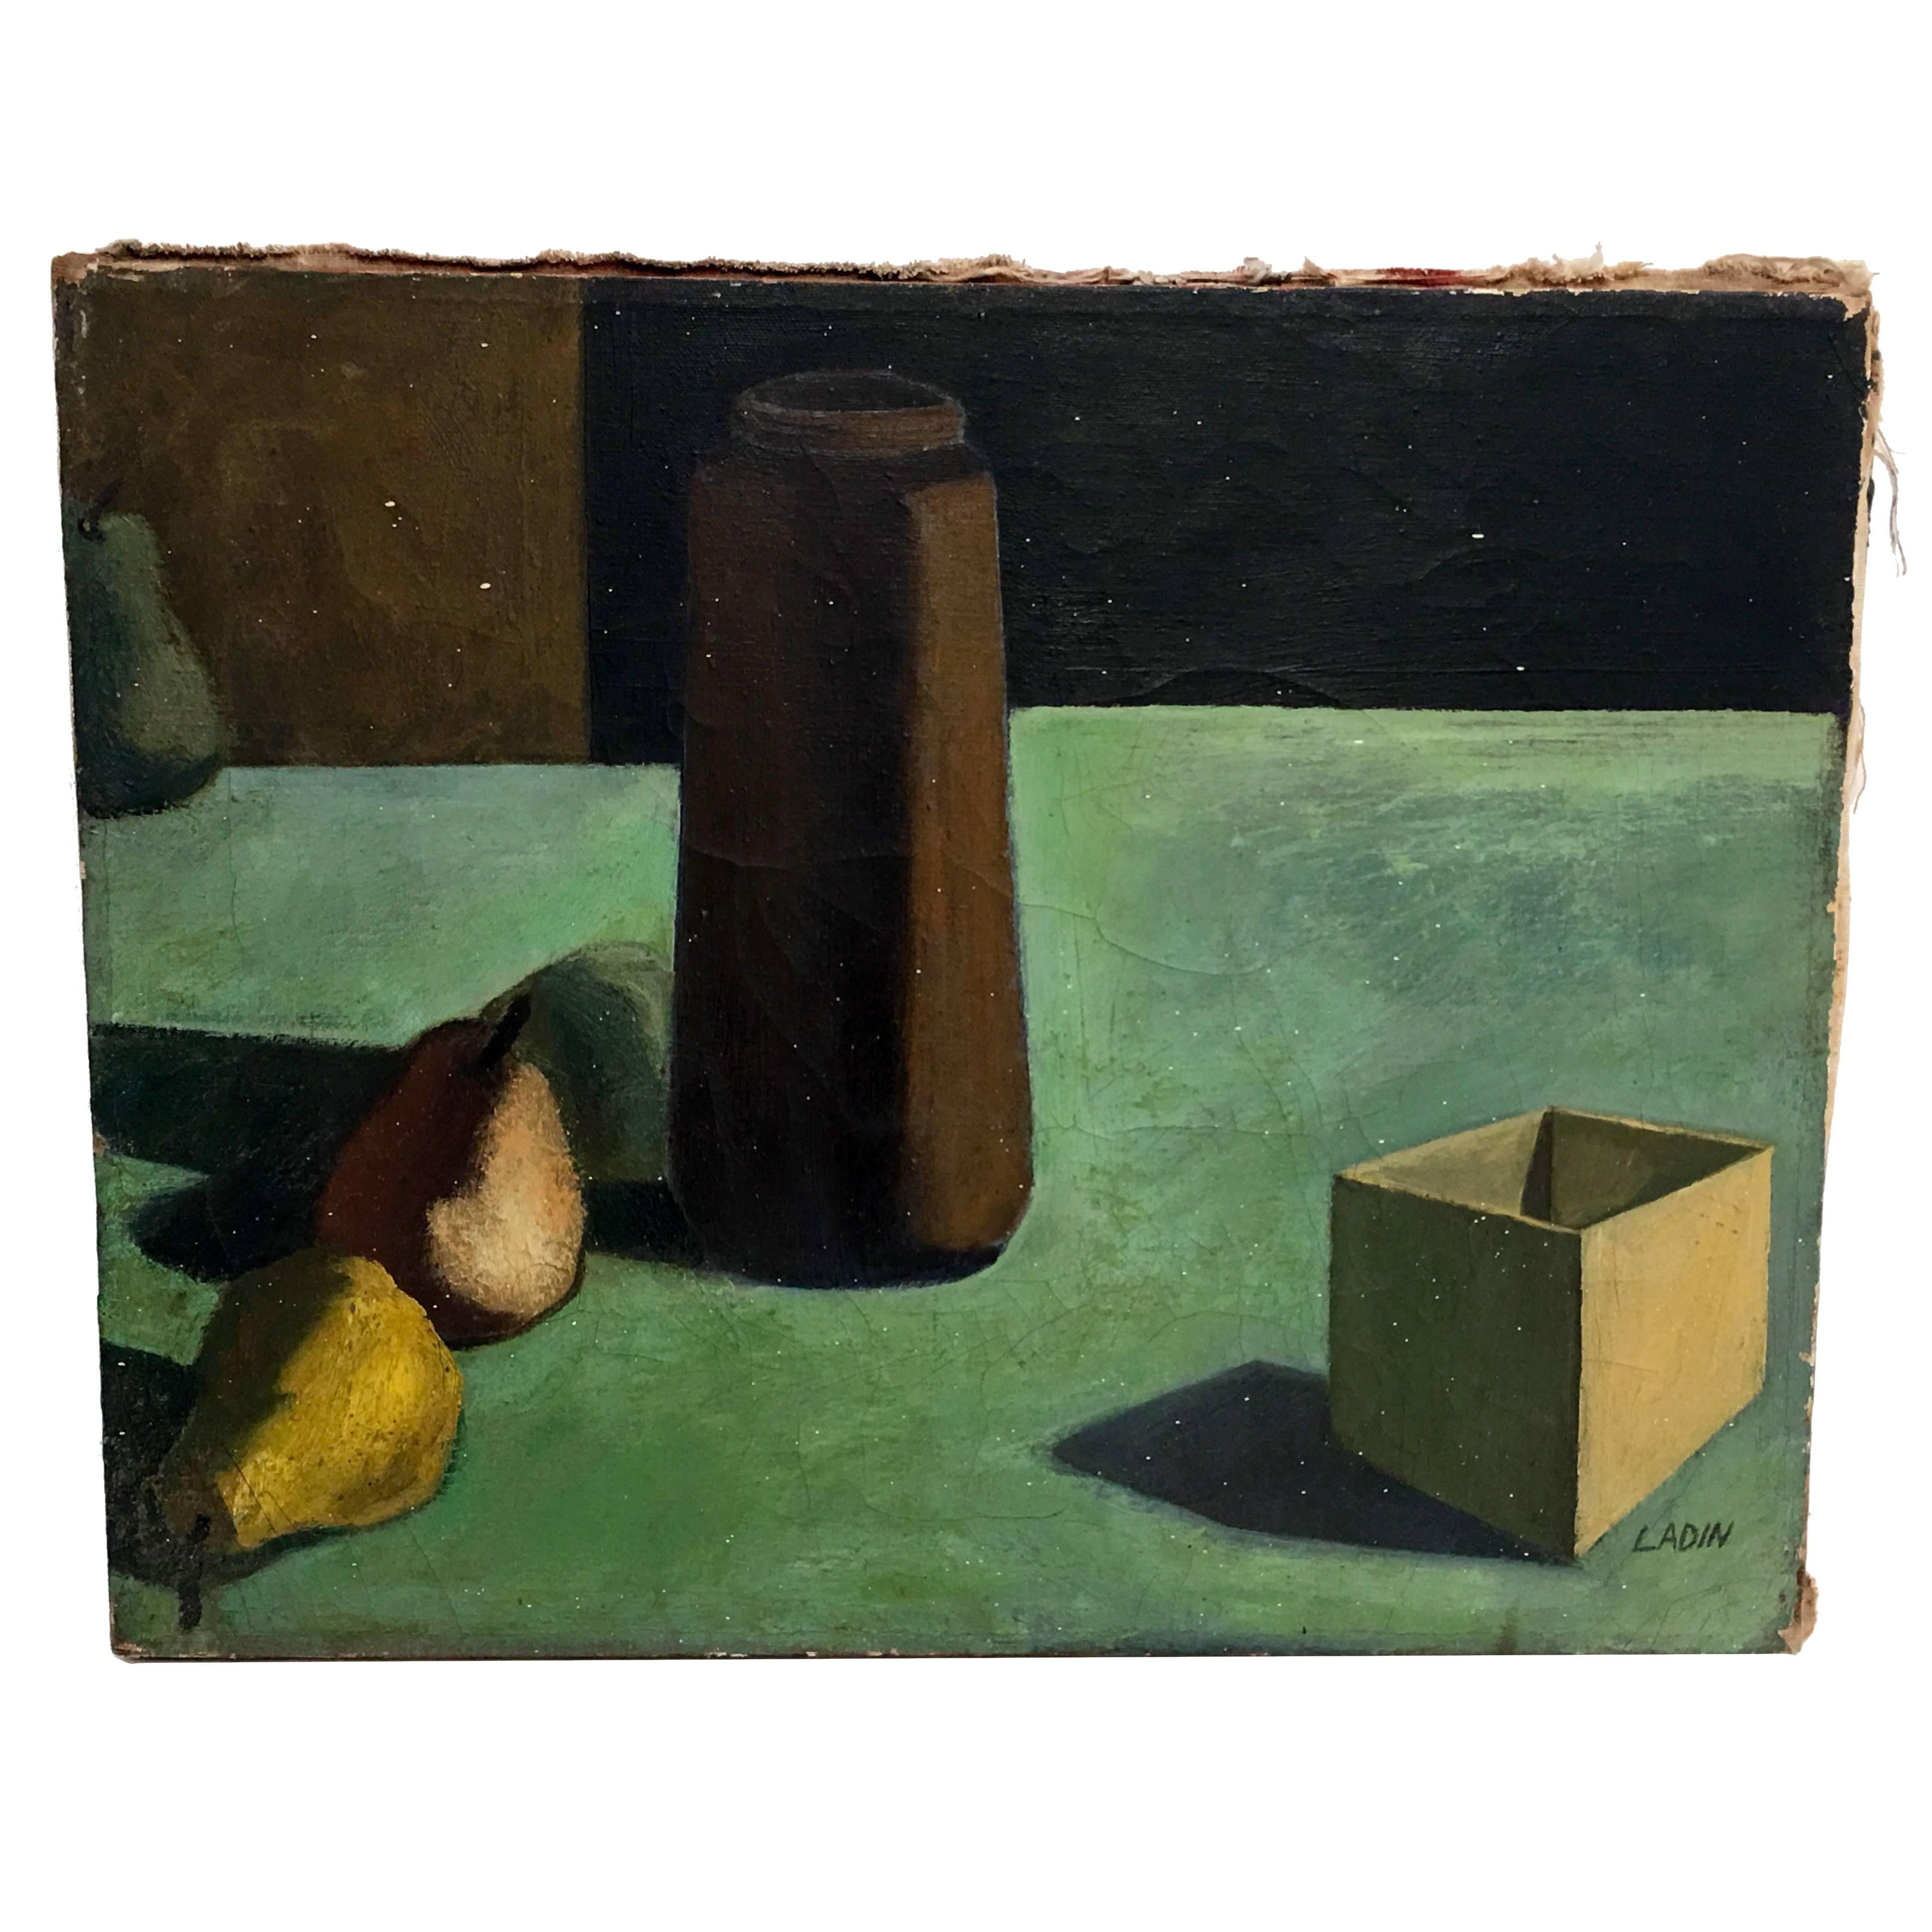 Still life painting with brown vase and pears, signed Ladin and dated 1962. Oil on canvas, newly framed. American, mid-20th century. 
Please see our listed companion painting by this artist.